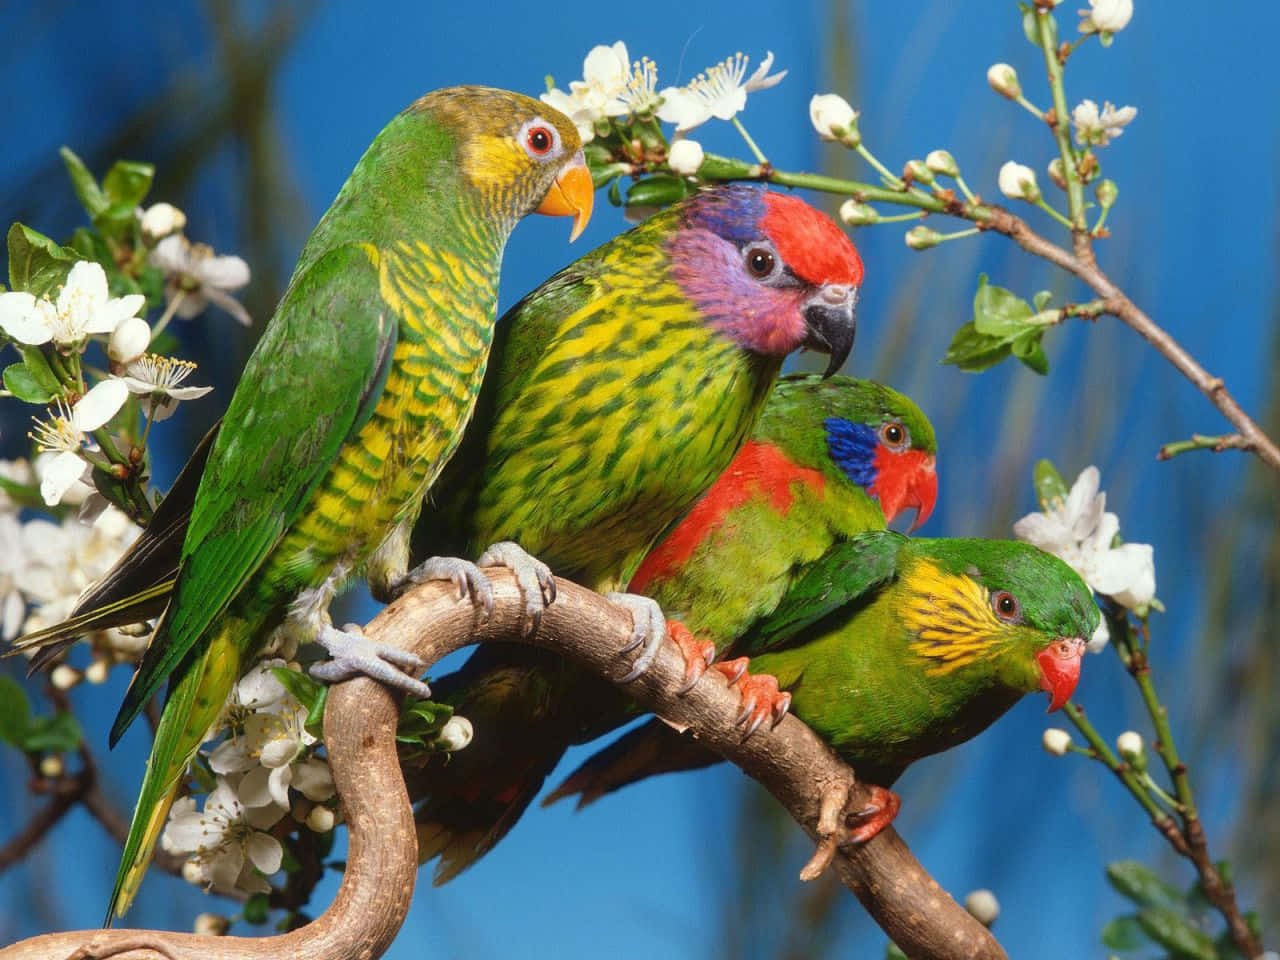 The beauty and grace of these vibrant birds.